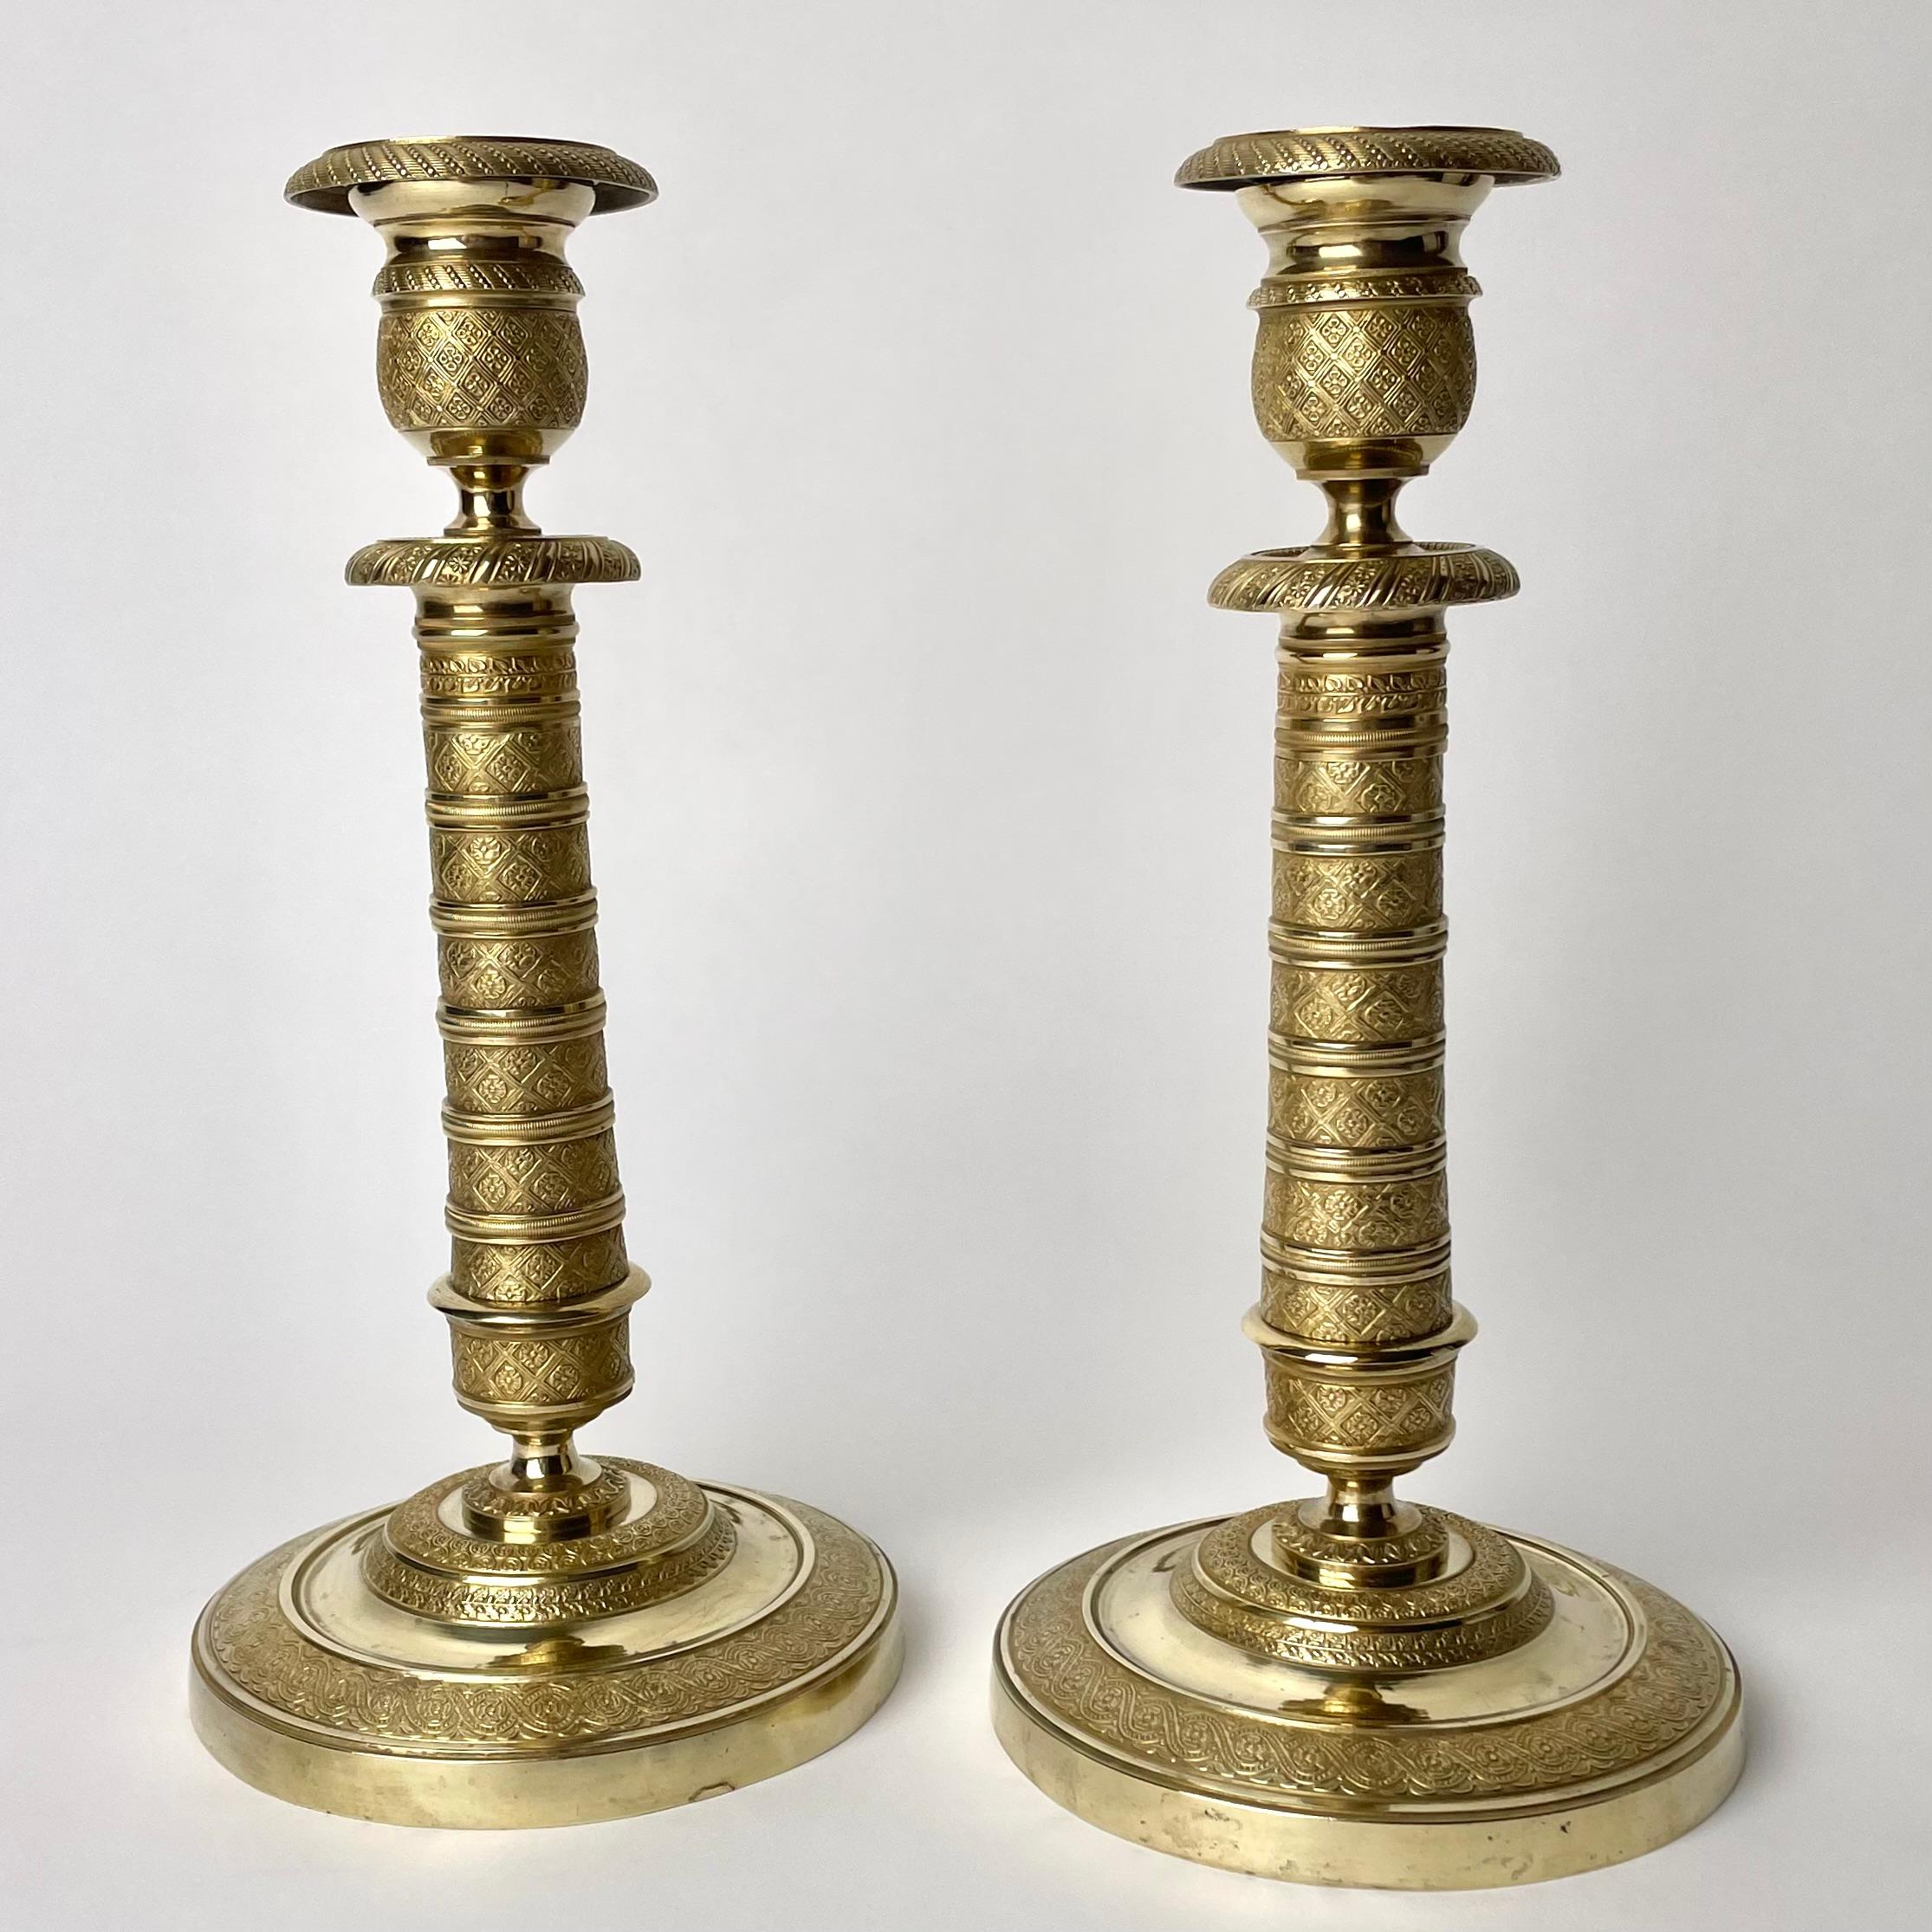 A very Elegant pair of Empire Candlesticks in gilt bronze. Made in France during the 1810s. Richly decorated in period flowers and check patterns. Beautiful wide base.


Wear consistent with age and use 